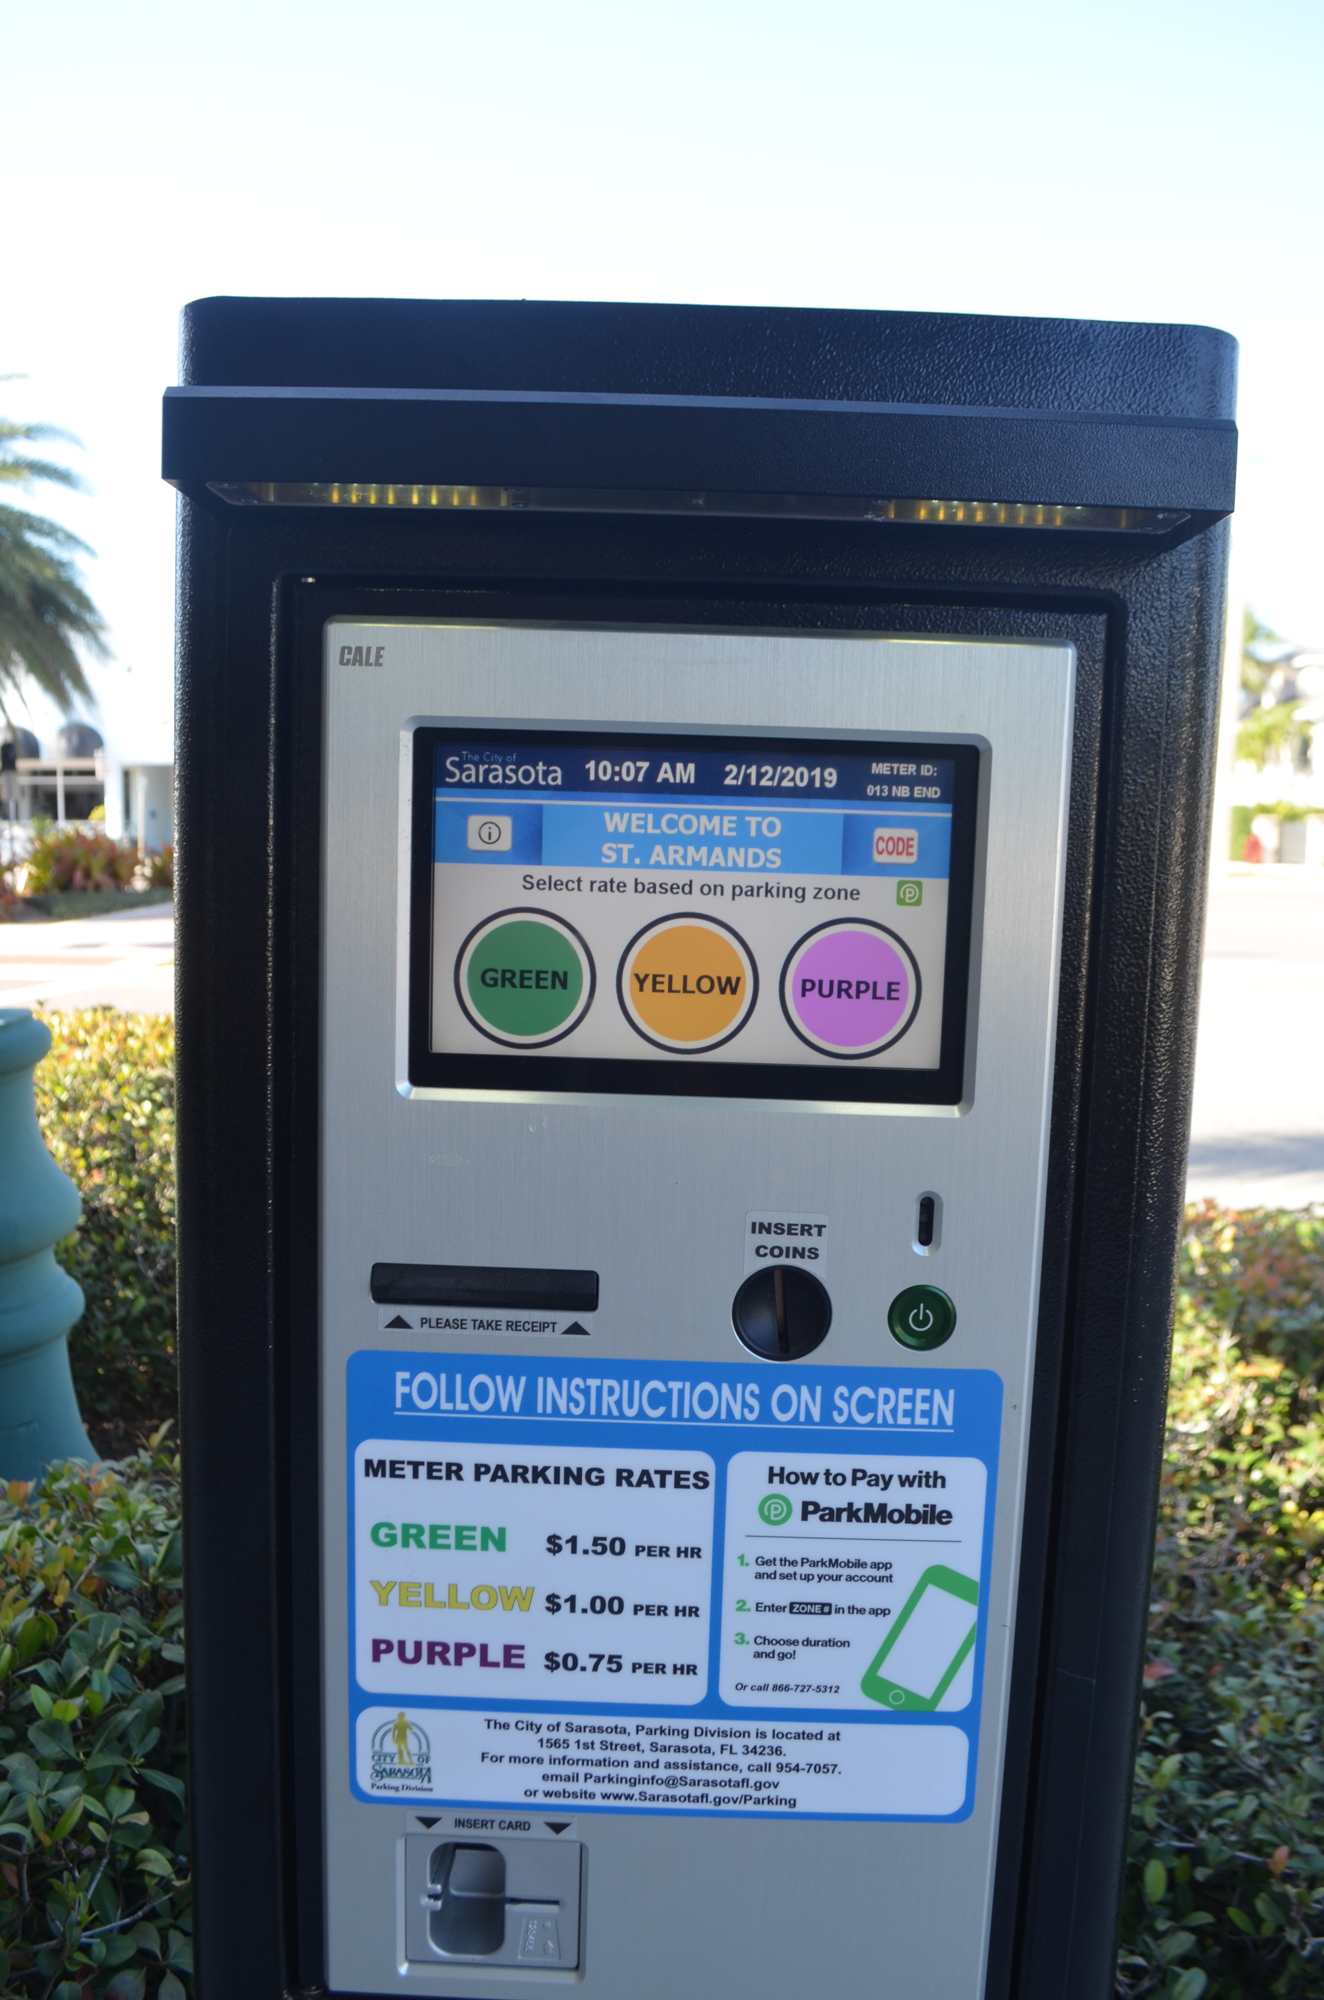 The city has established a tiered pricing structure for different spots in the St. Armands parking district.